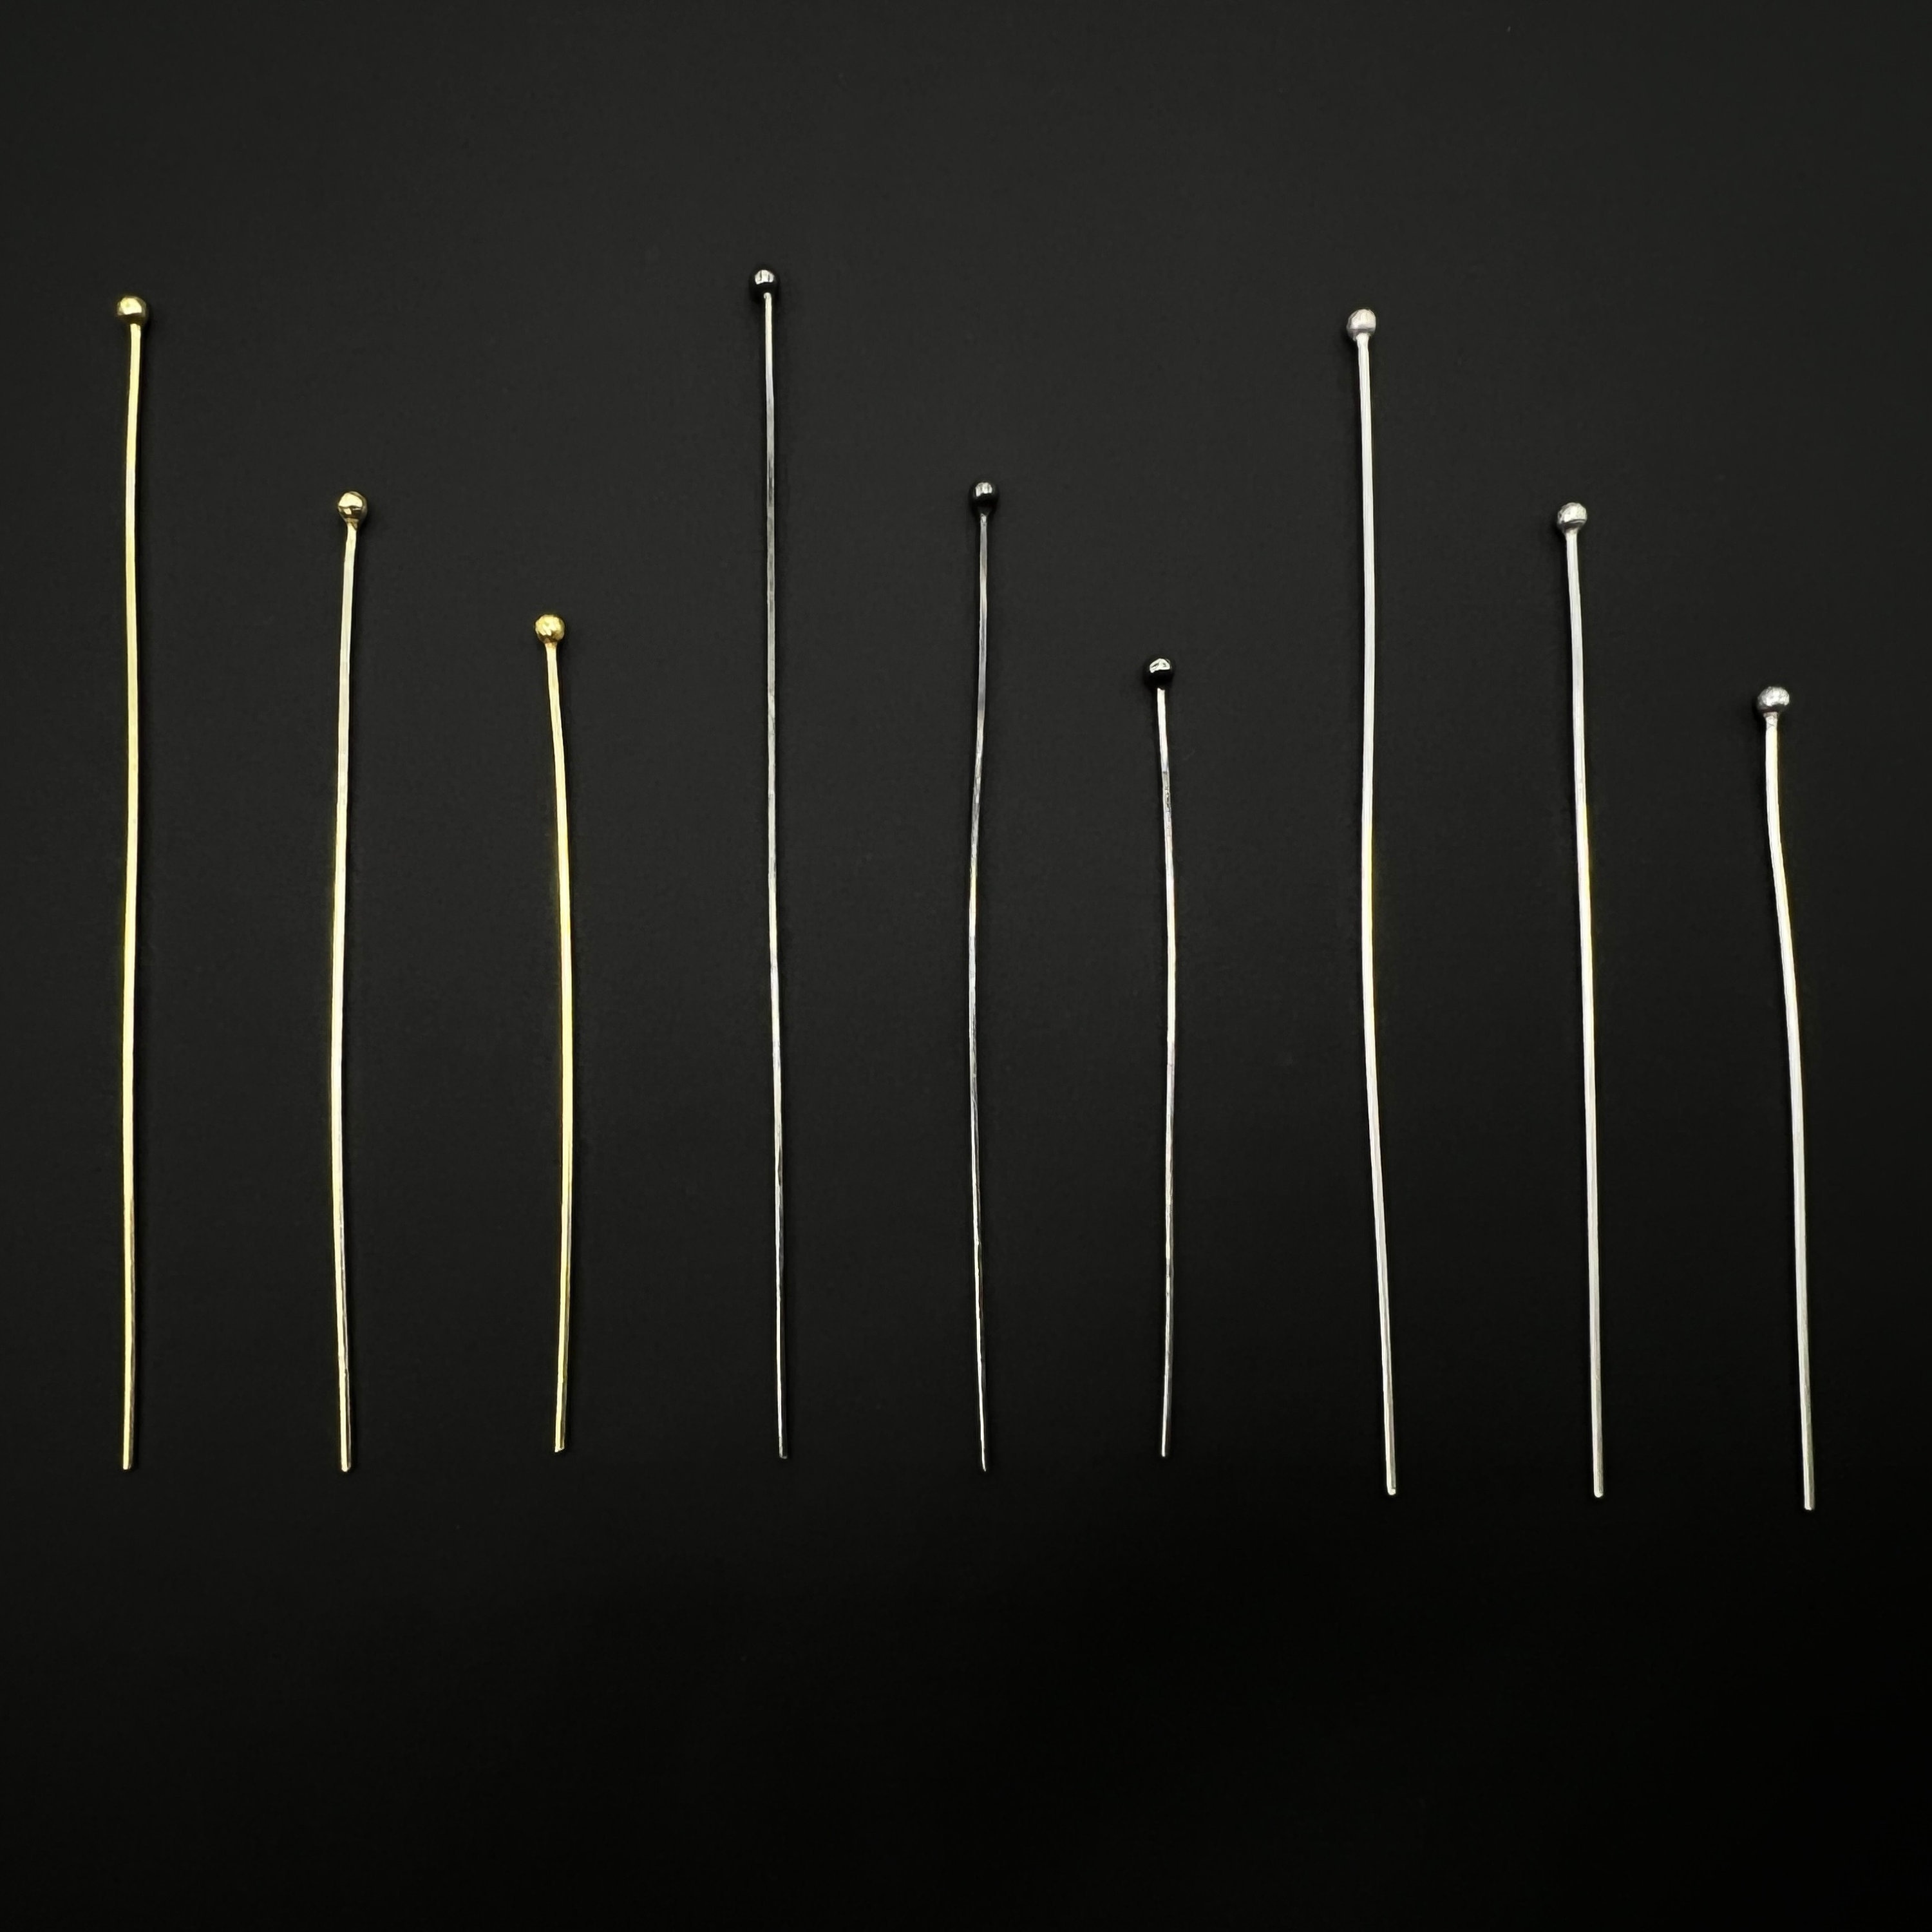 Uxcell 400Pcs Flat Head Pins for Jewelry Making 30mm Brass Flat Head Pins  Jewelry Head Pins 20 Gauge Red Copper